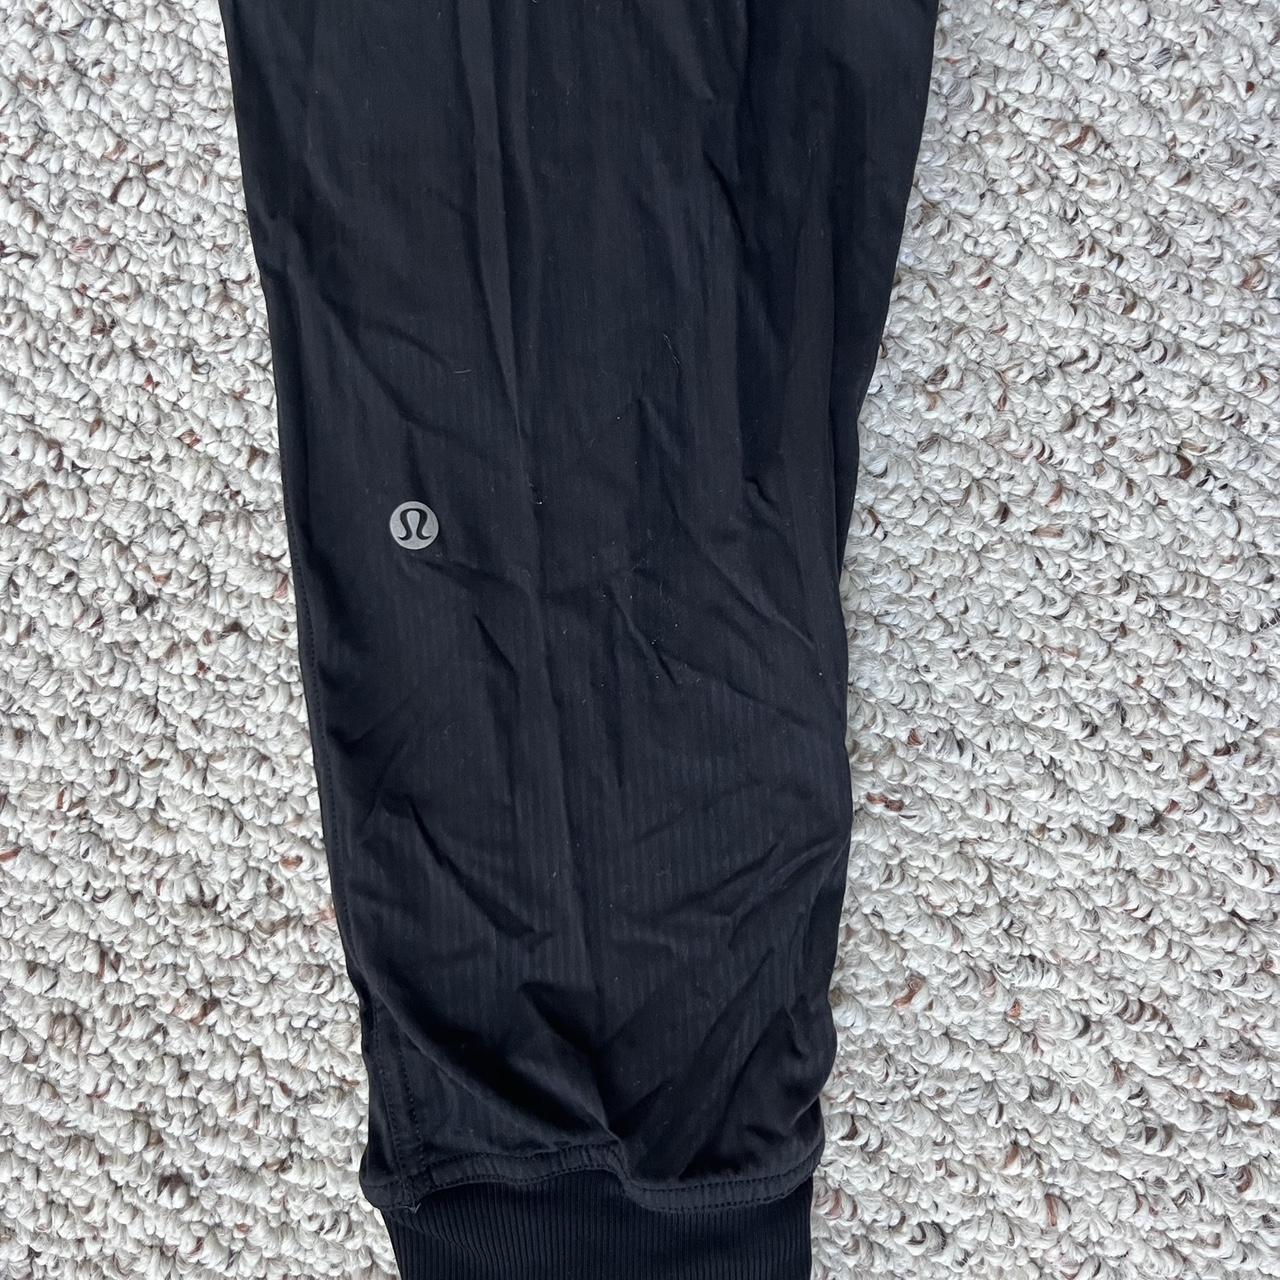 Lululemon Dance Joggers size 6 almost perfect (very - Depop